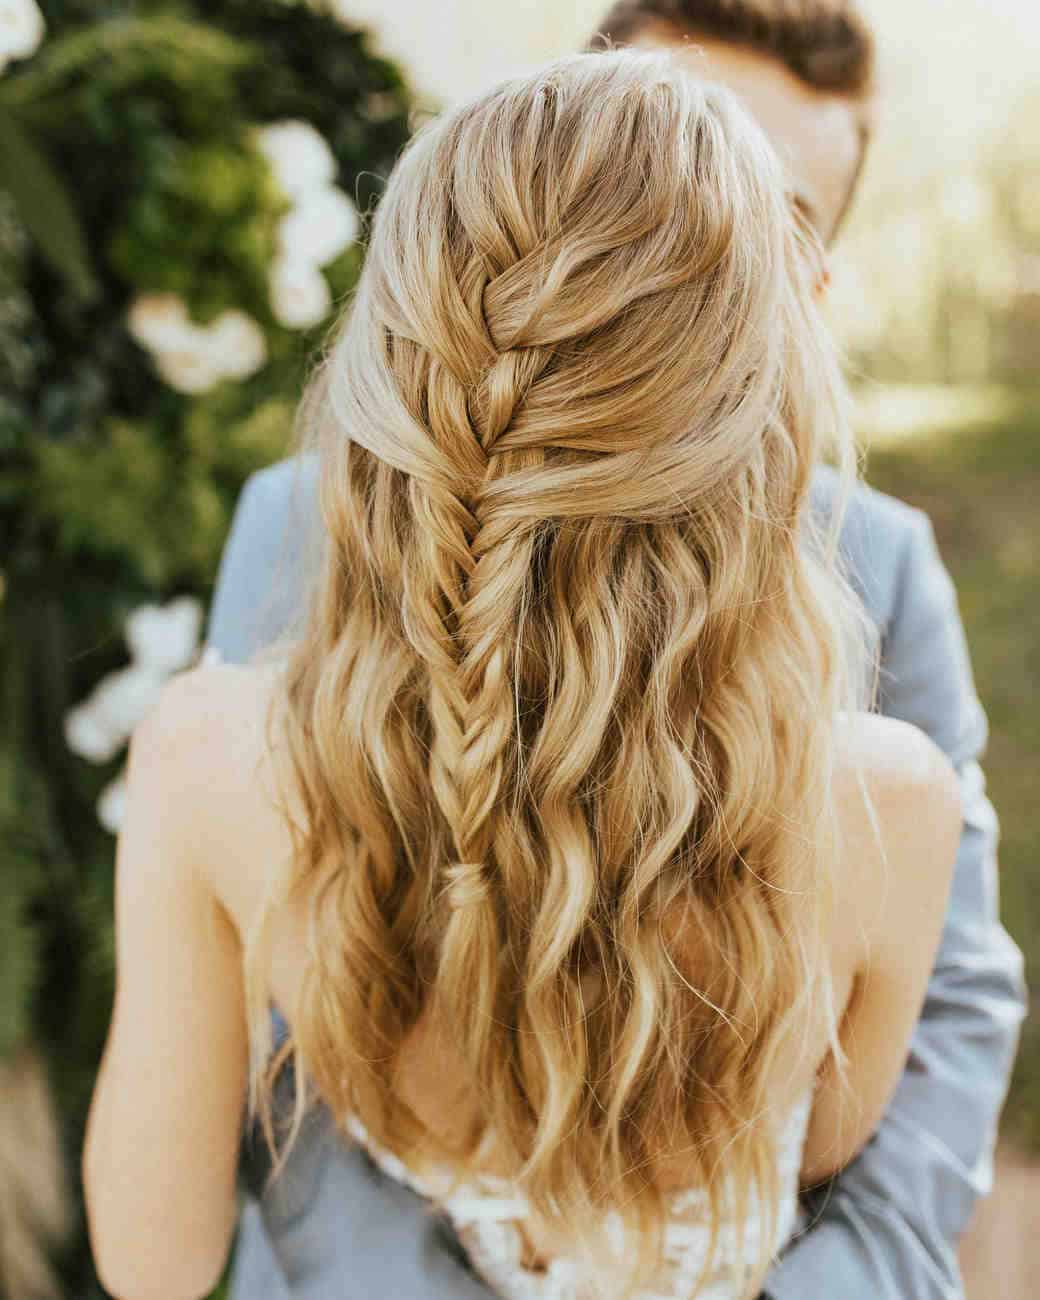 14 Wedding Hairstyles For Las With